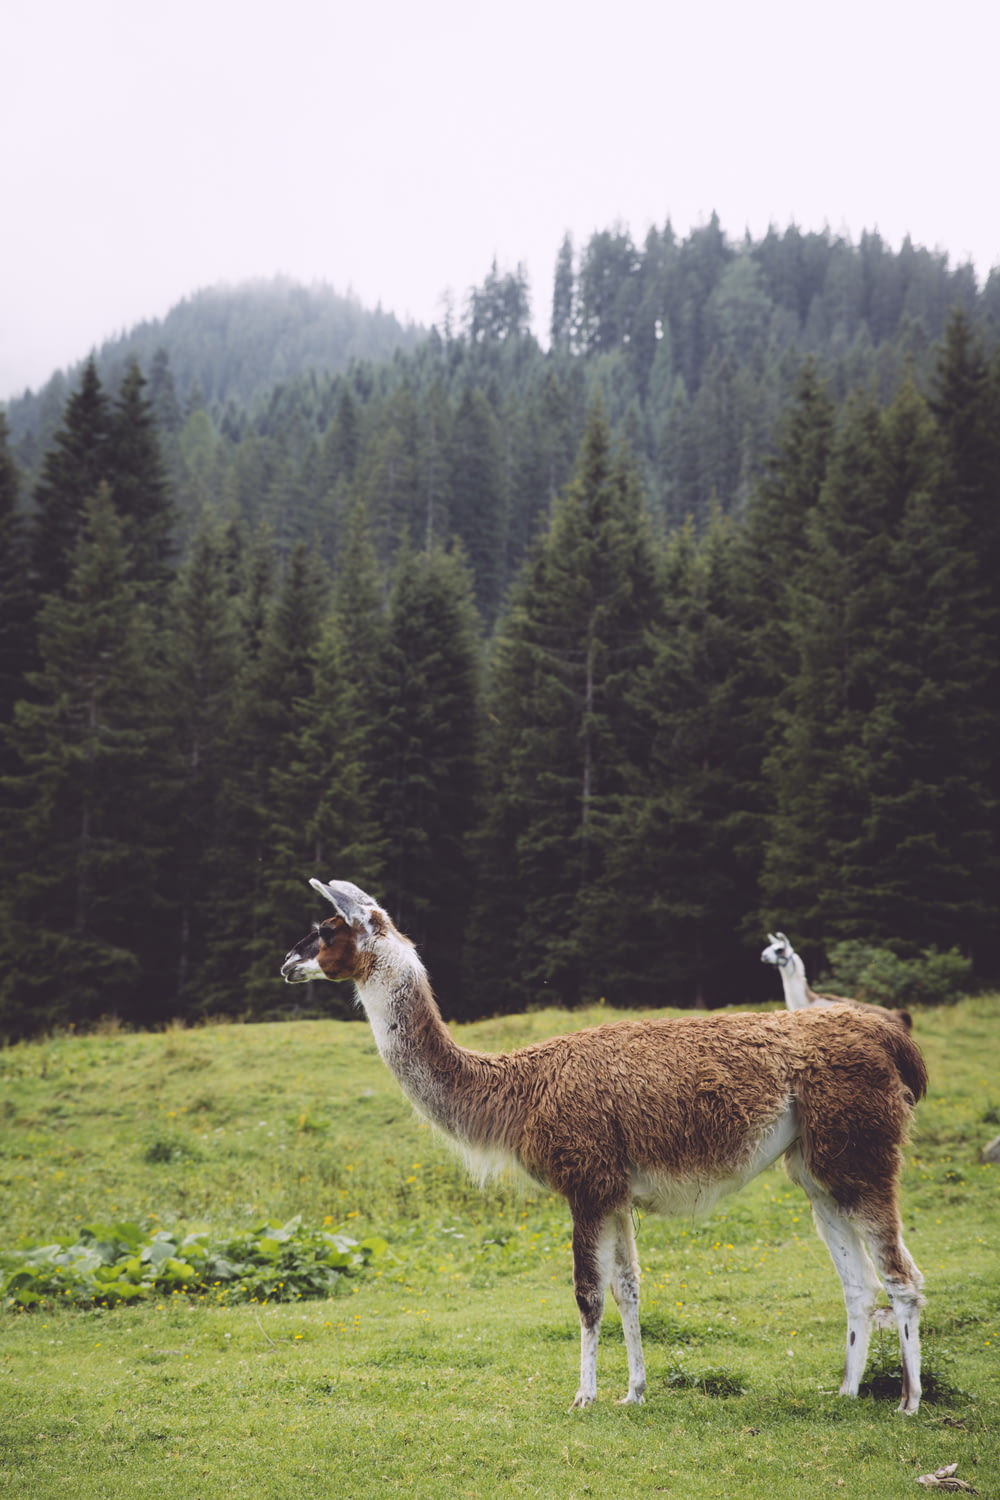 a llama in a field with trees in the background